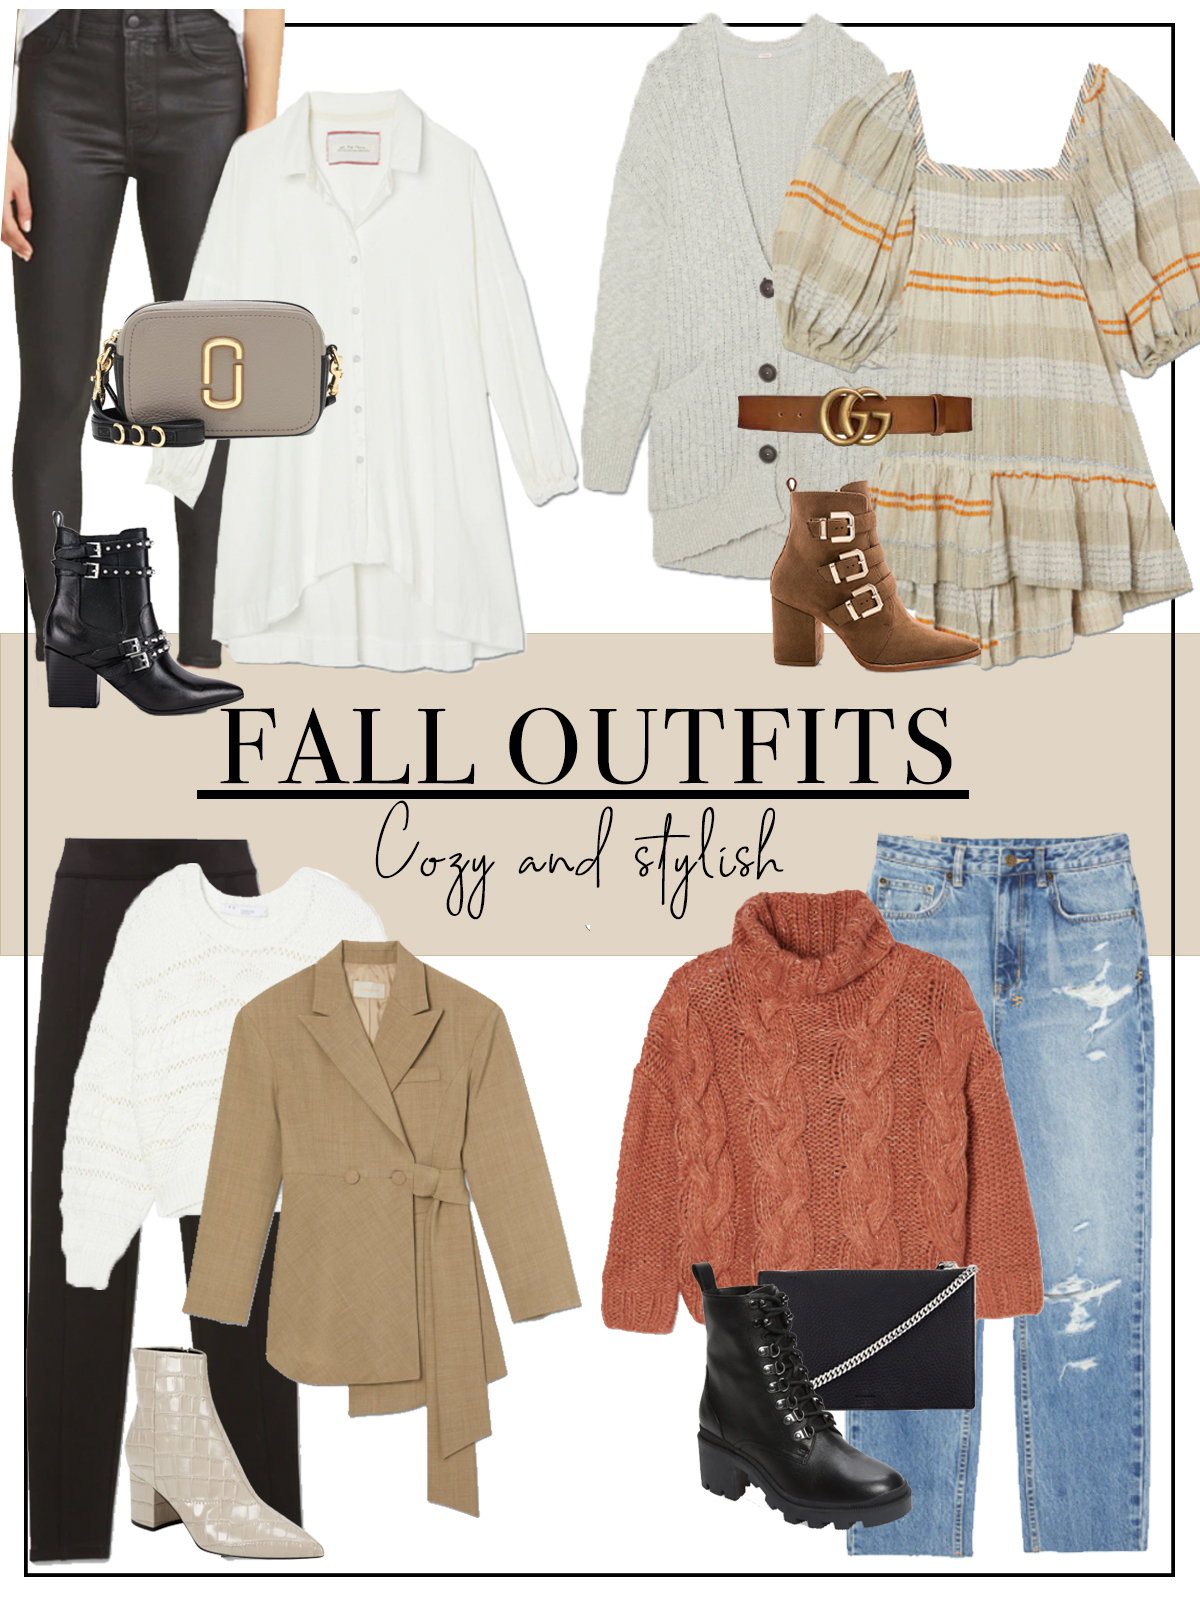 FALL OUTFIT IDEAS FROM MY FAVORITE RETAILERS! | CHIC TALK | CHIC TALK